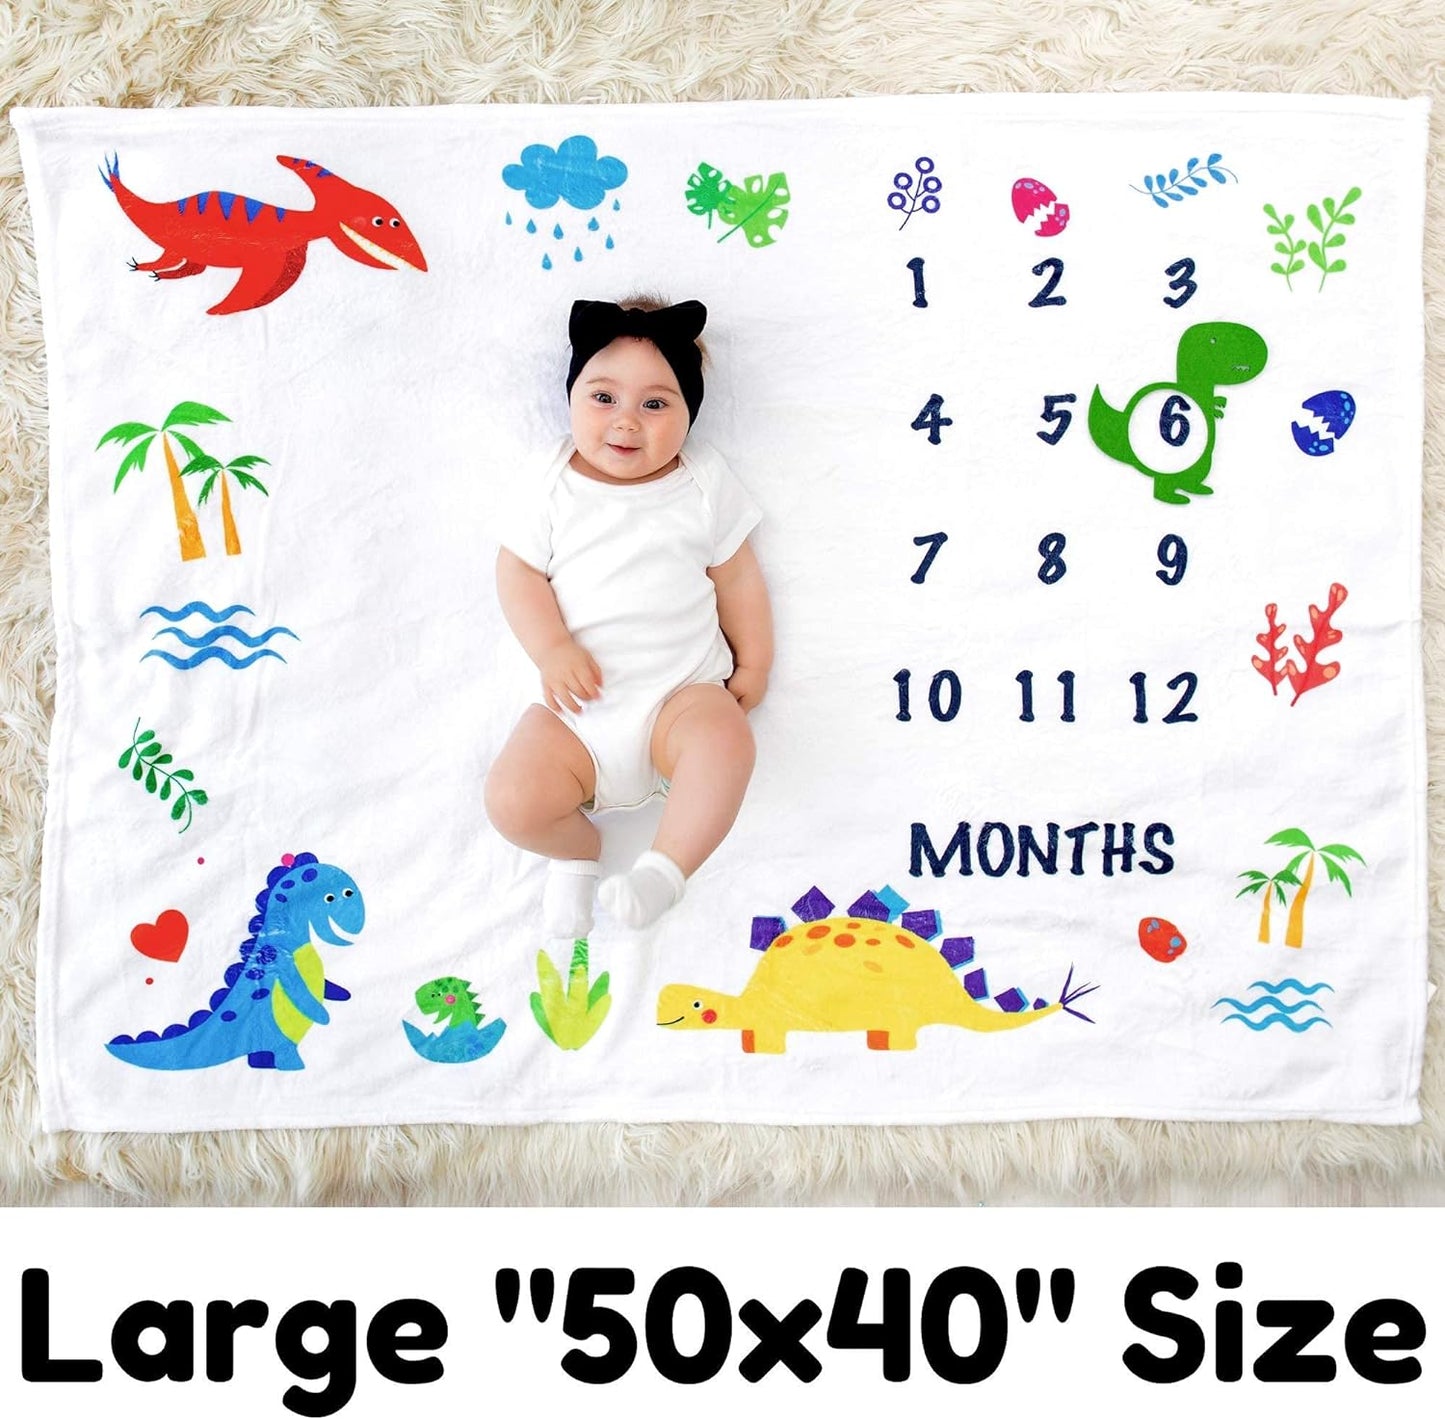 KEMINA BLANKETS Baby Monthly Milestone Blanket Boy - Milestone Blanket for Baby Boy Includes Felt Frame and Personalized Board, Adventure Mountain Month Blanket Woodland Nursery, Baby Shower 50x40